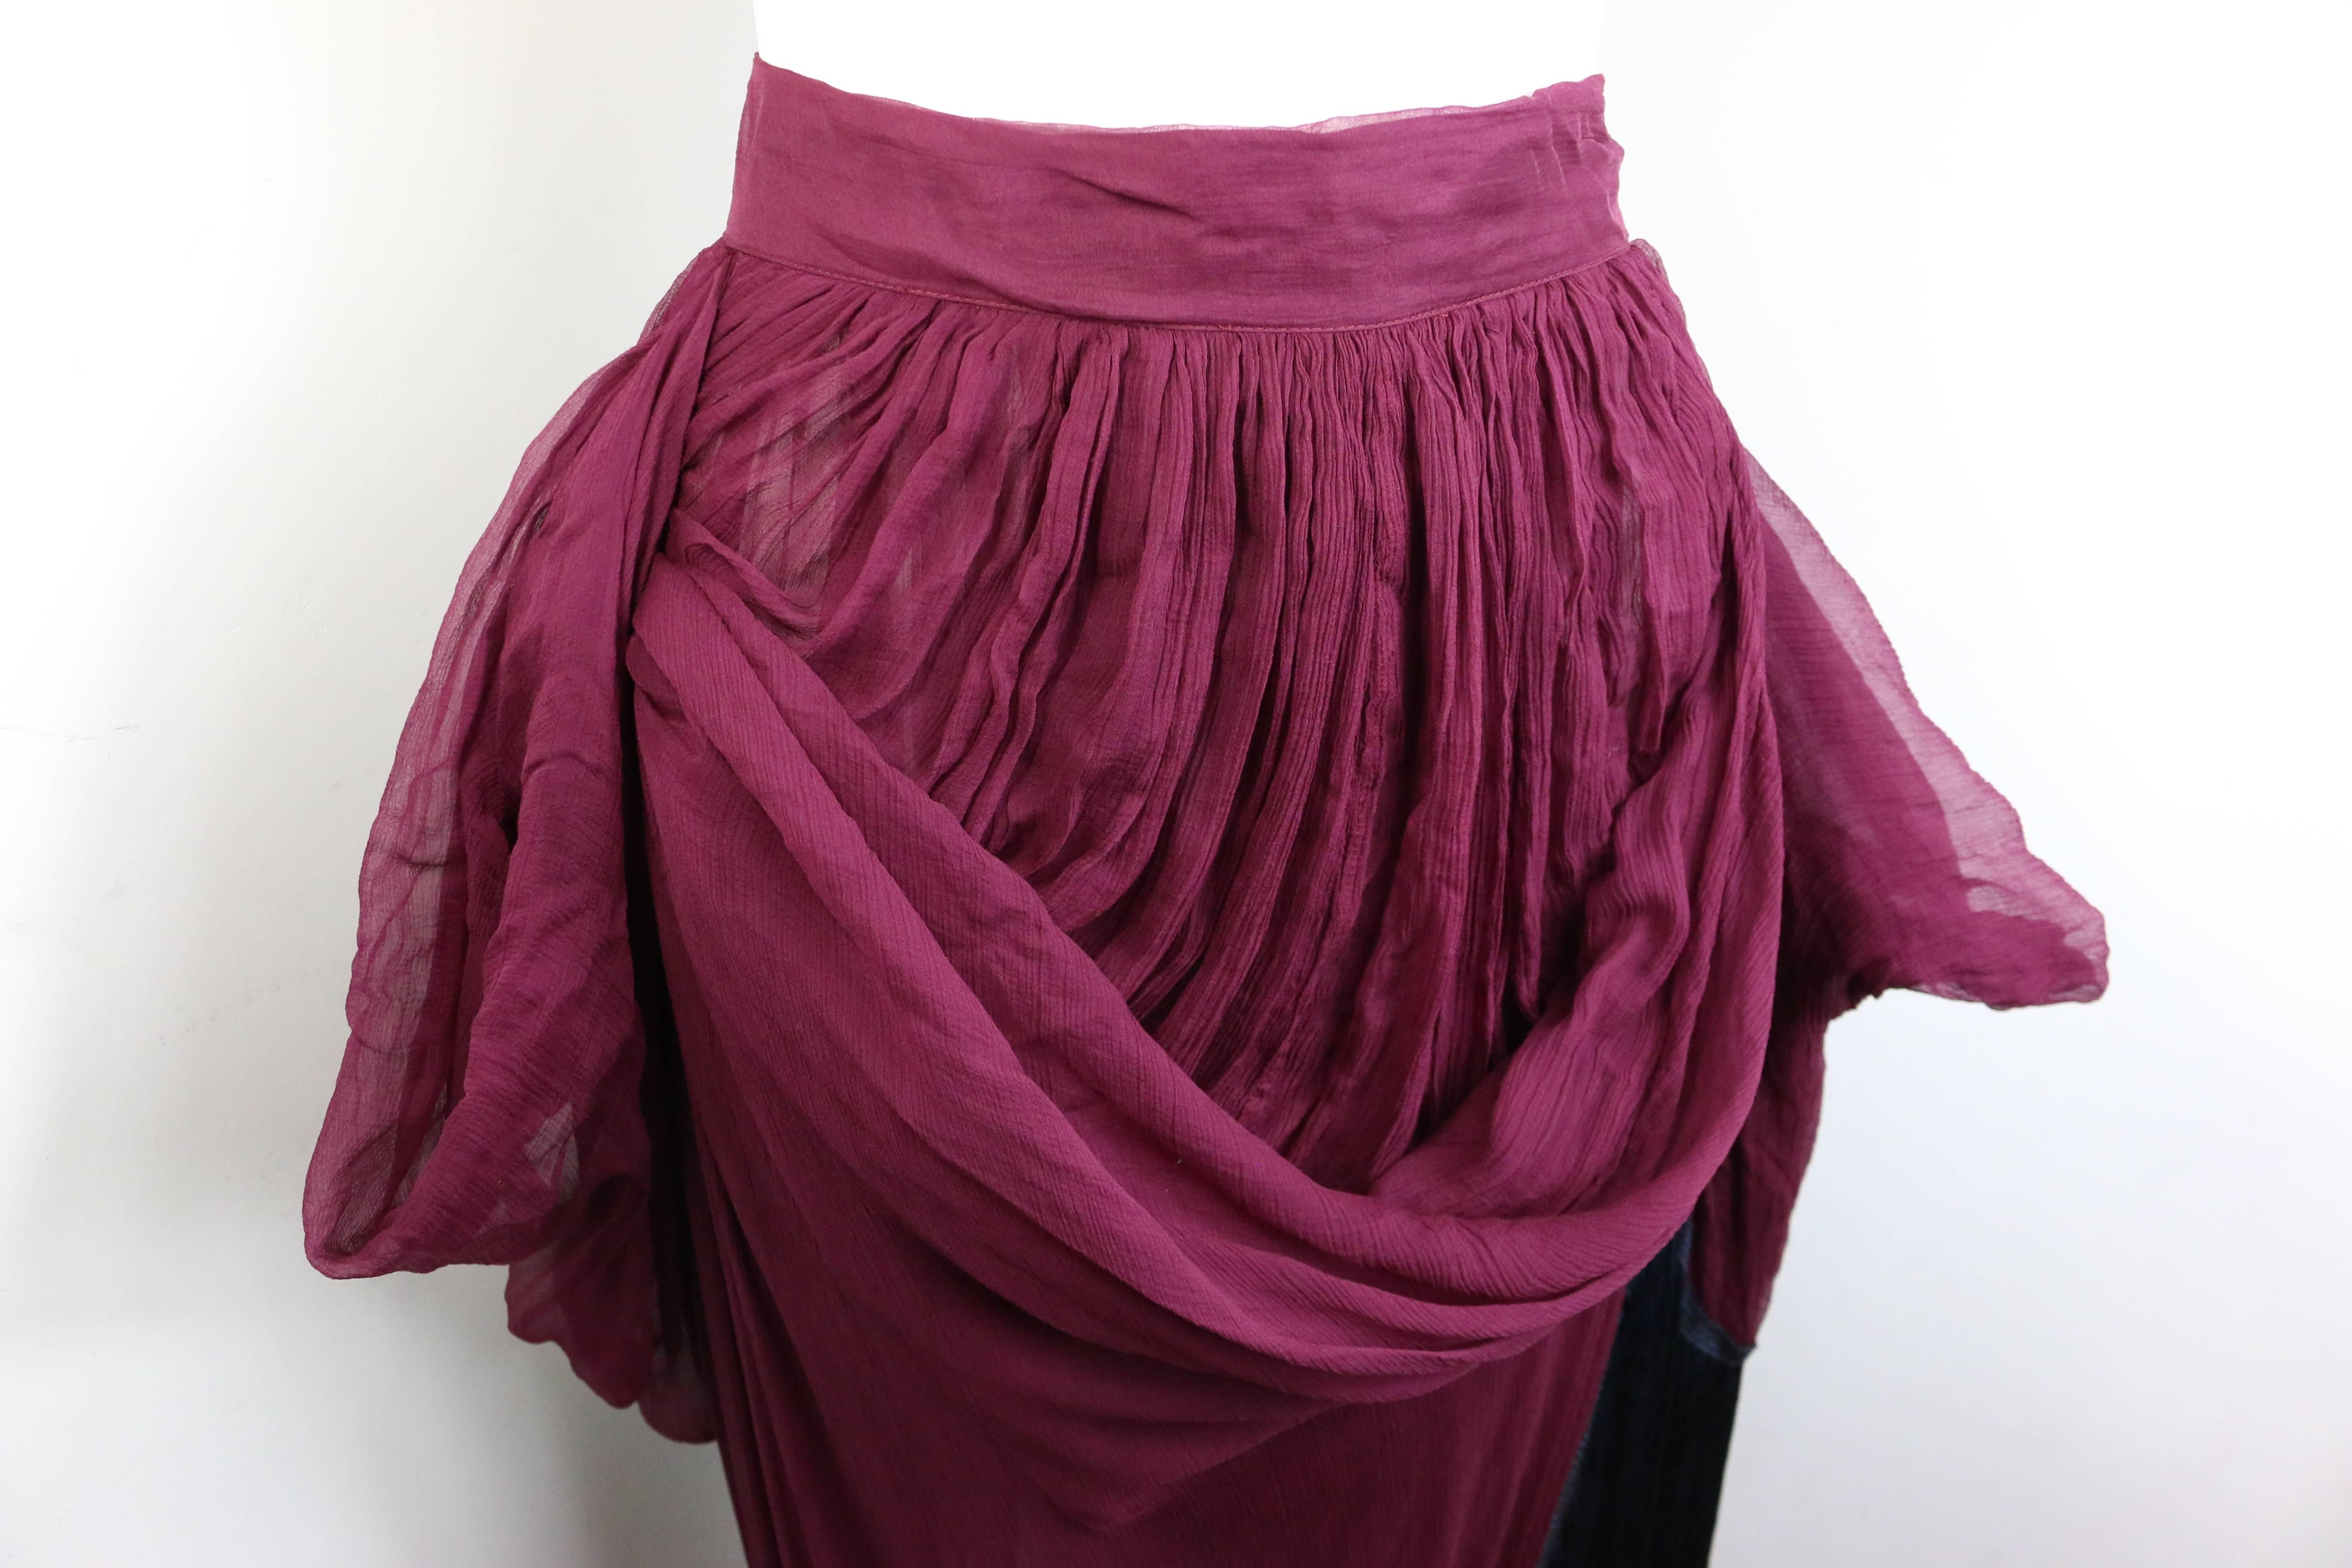 - Vintage Dolce and Gabbana red silk pleated balloon black fringe long skirt..

- Made in Italy. 

- Size 40. 

- 100% Silk. 

